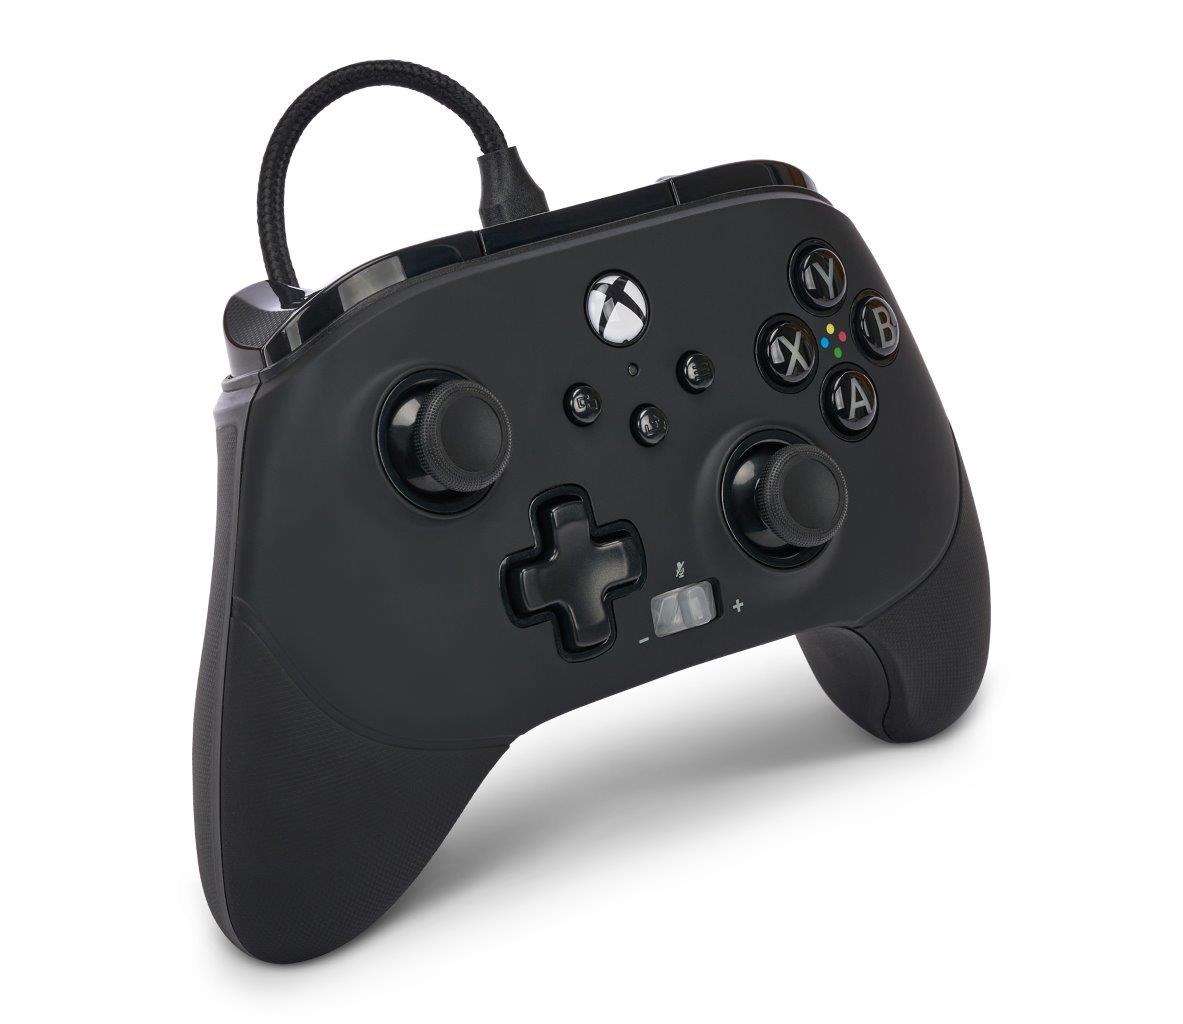 PowerA FUSION Pro 3 Wired Controller for Xbox Series X|S - Black